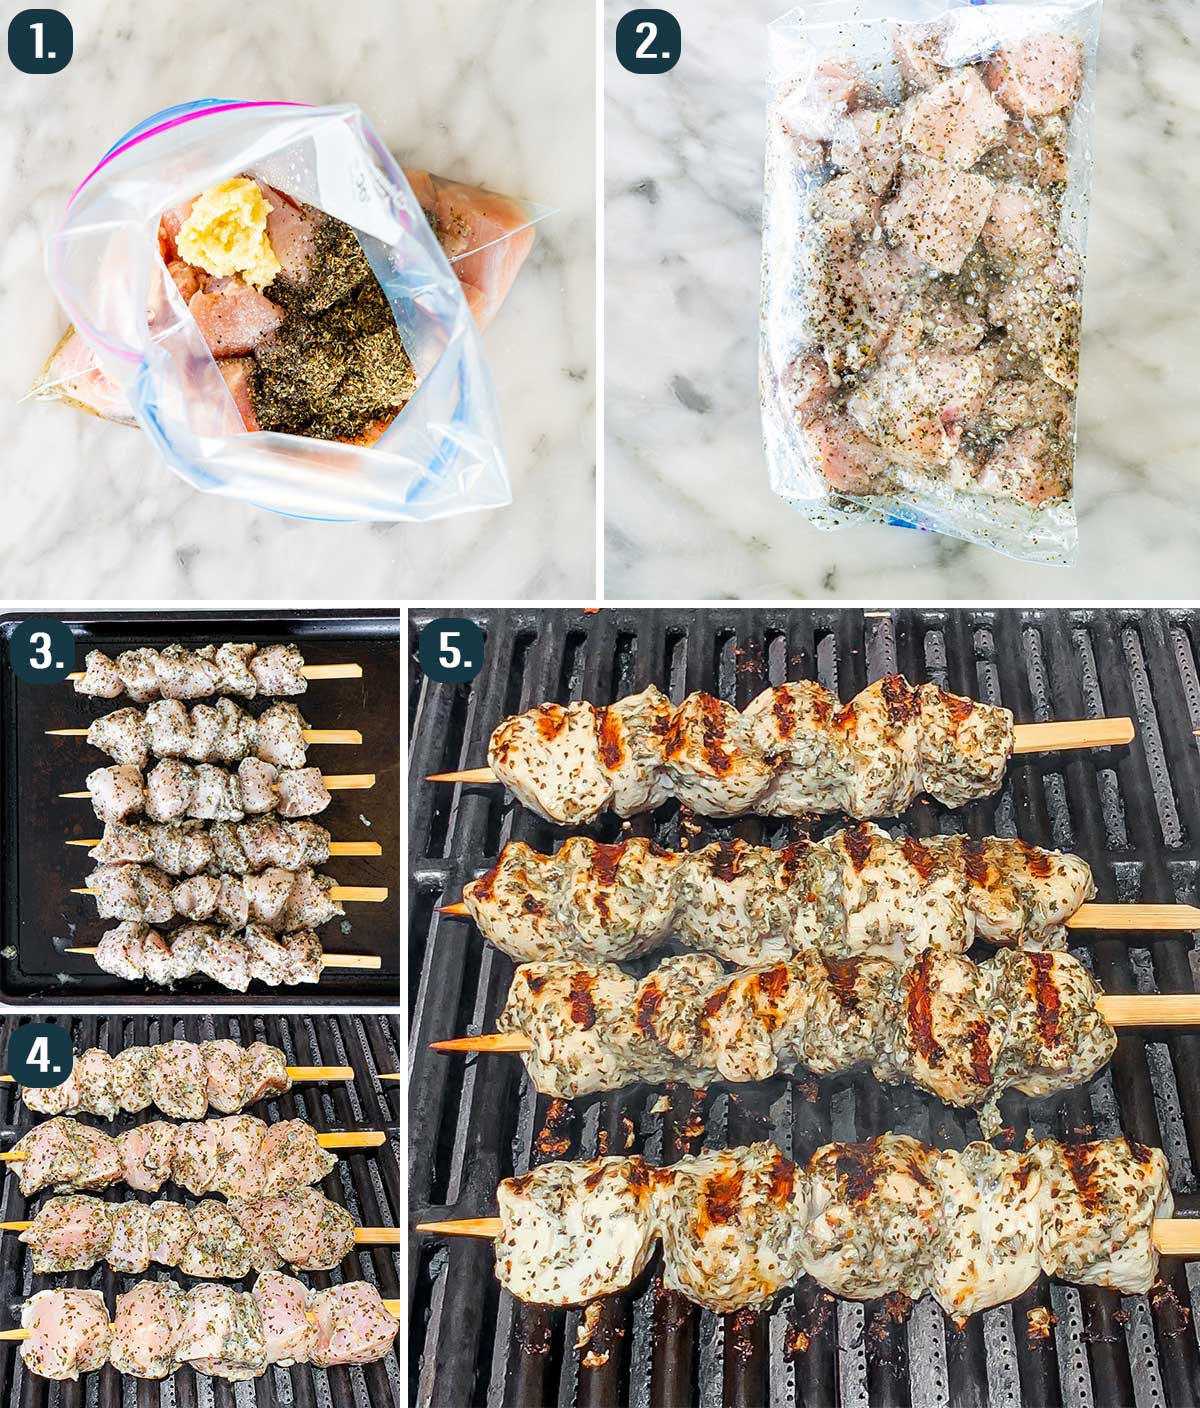 detailed process shots showing how to make chicken souvlaki skewers on the grill